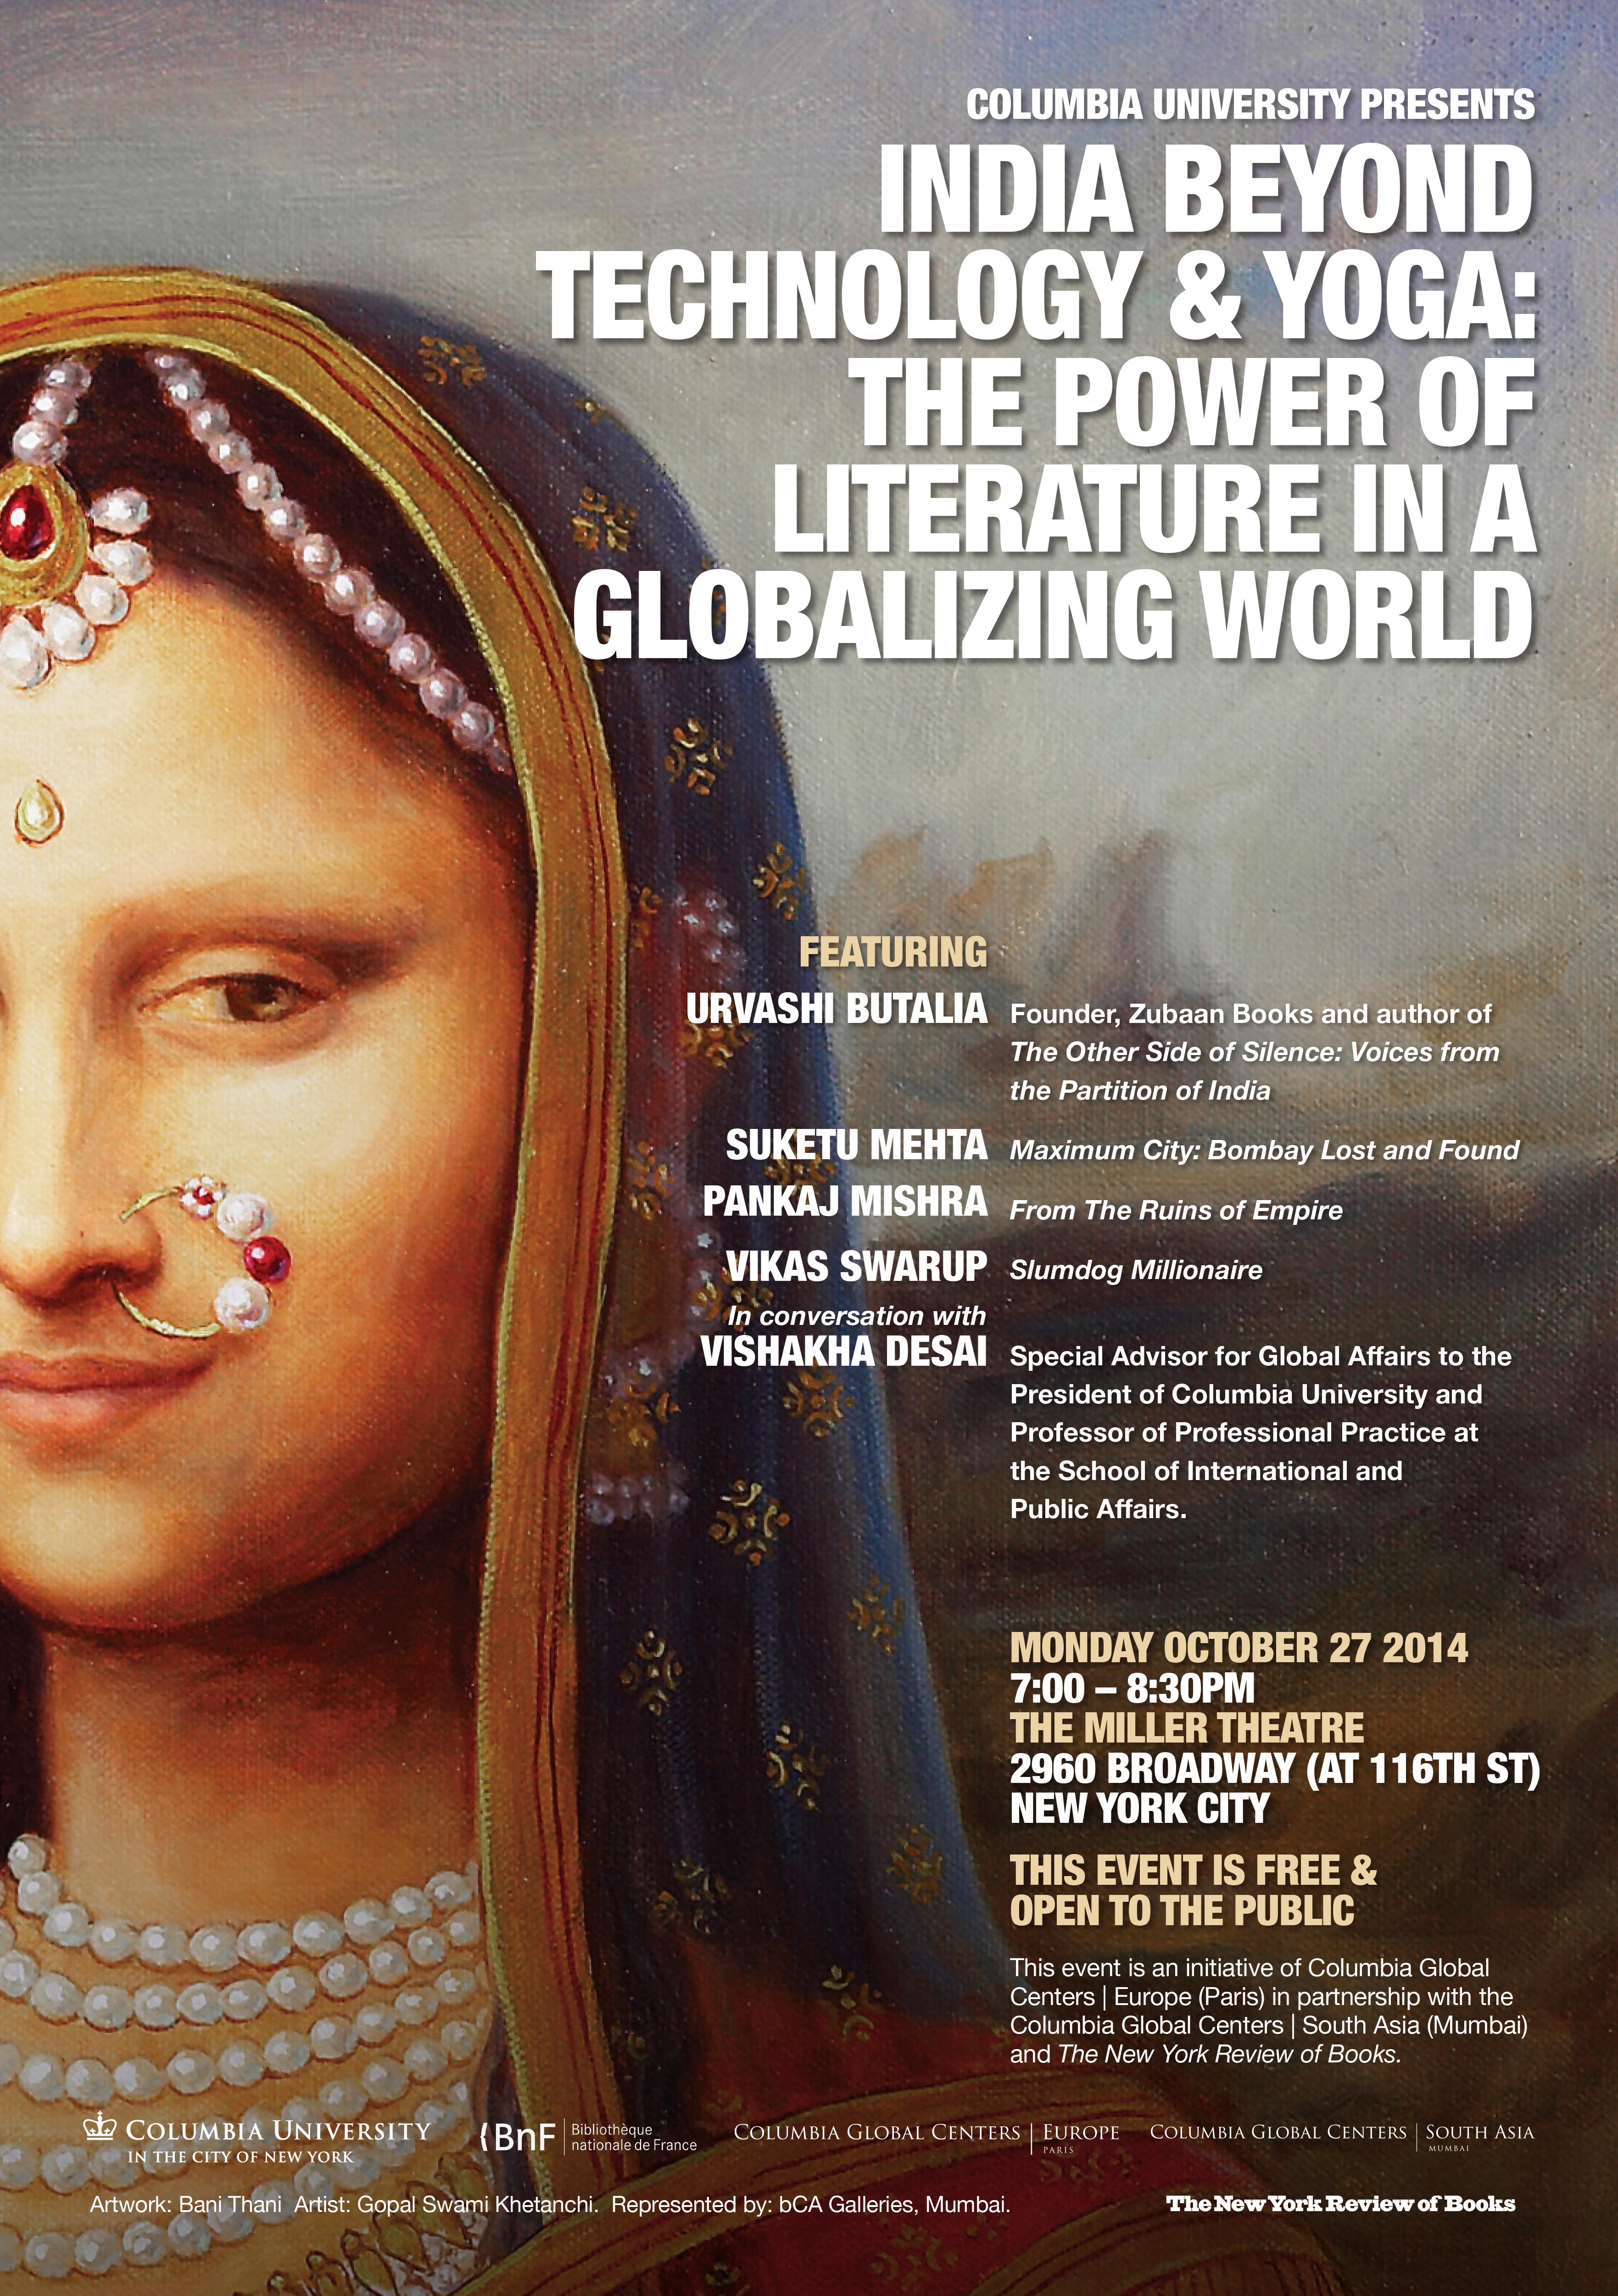 India Beyond Technology & Yoga: The Power of Literature in a Globalizing World